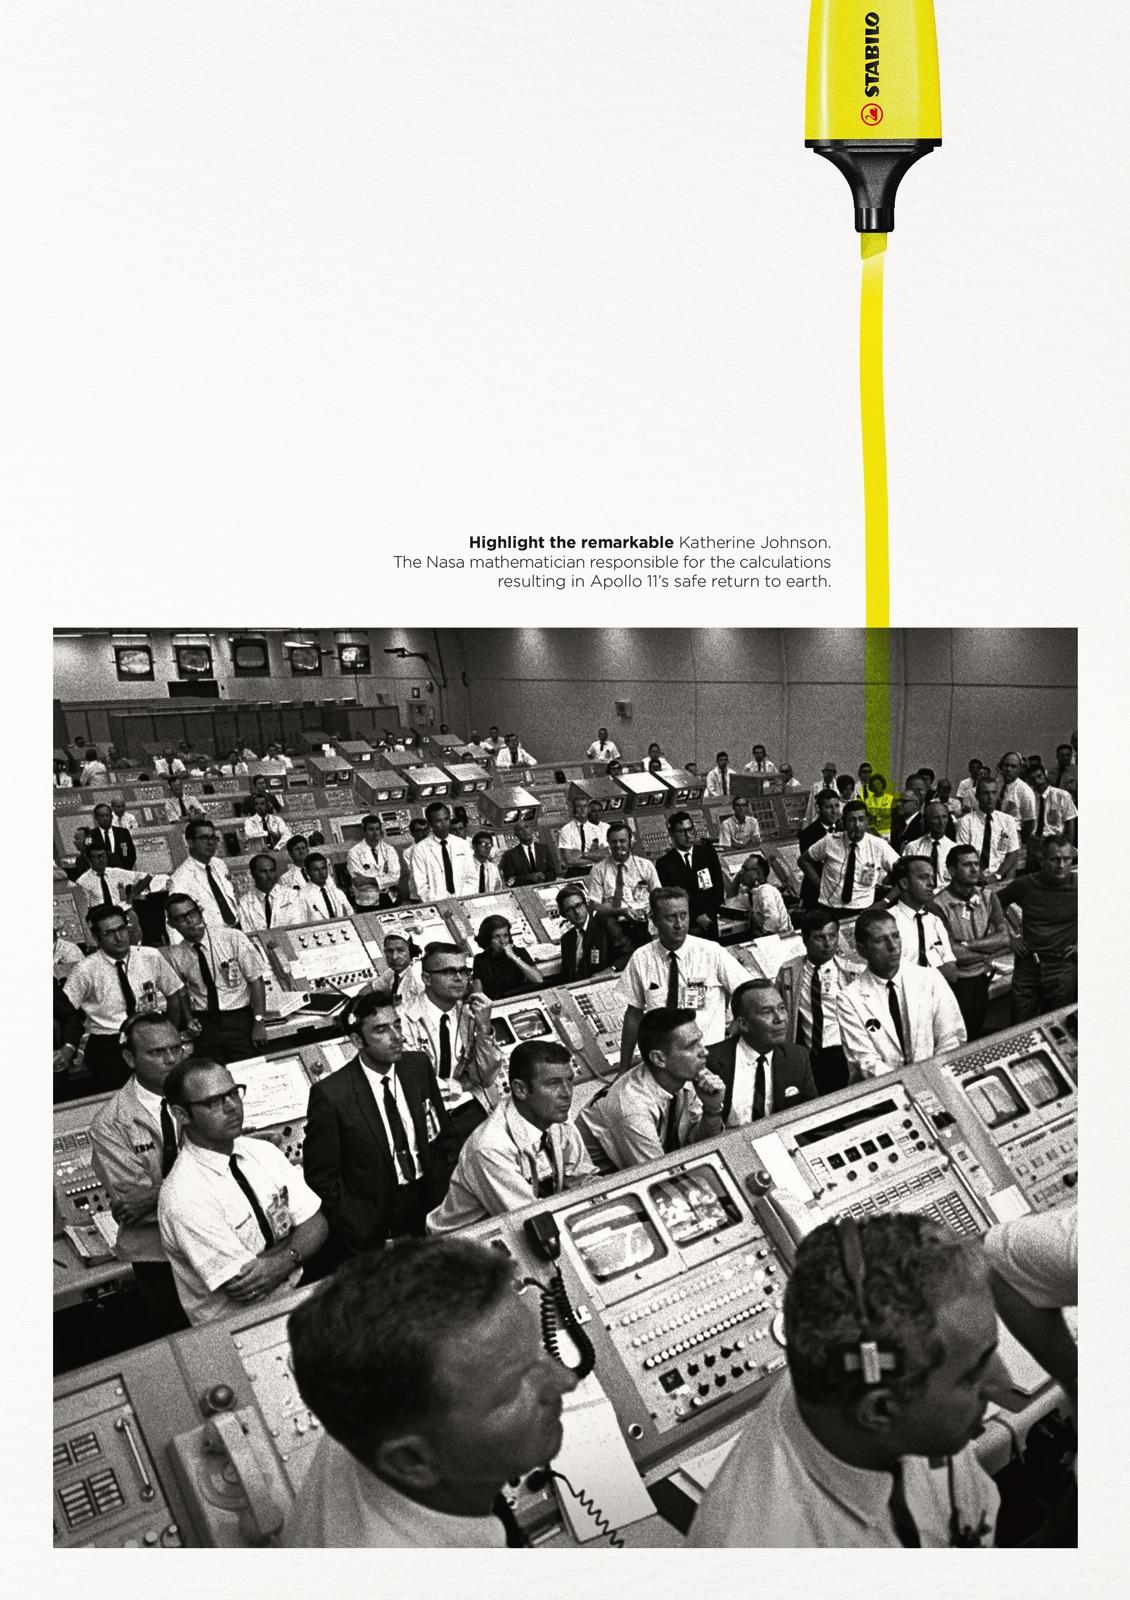 Remarkable Content Marketing Inspiration from a Highlighter Ad